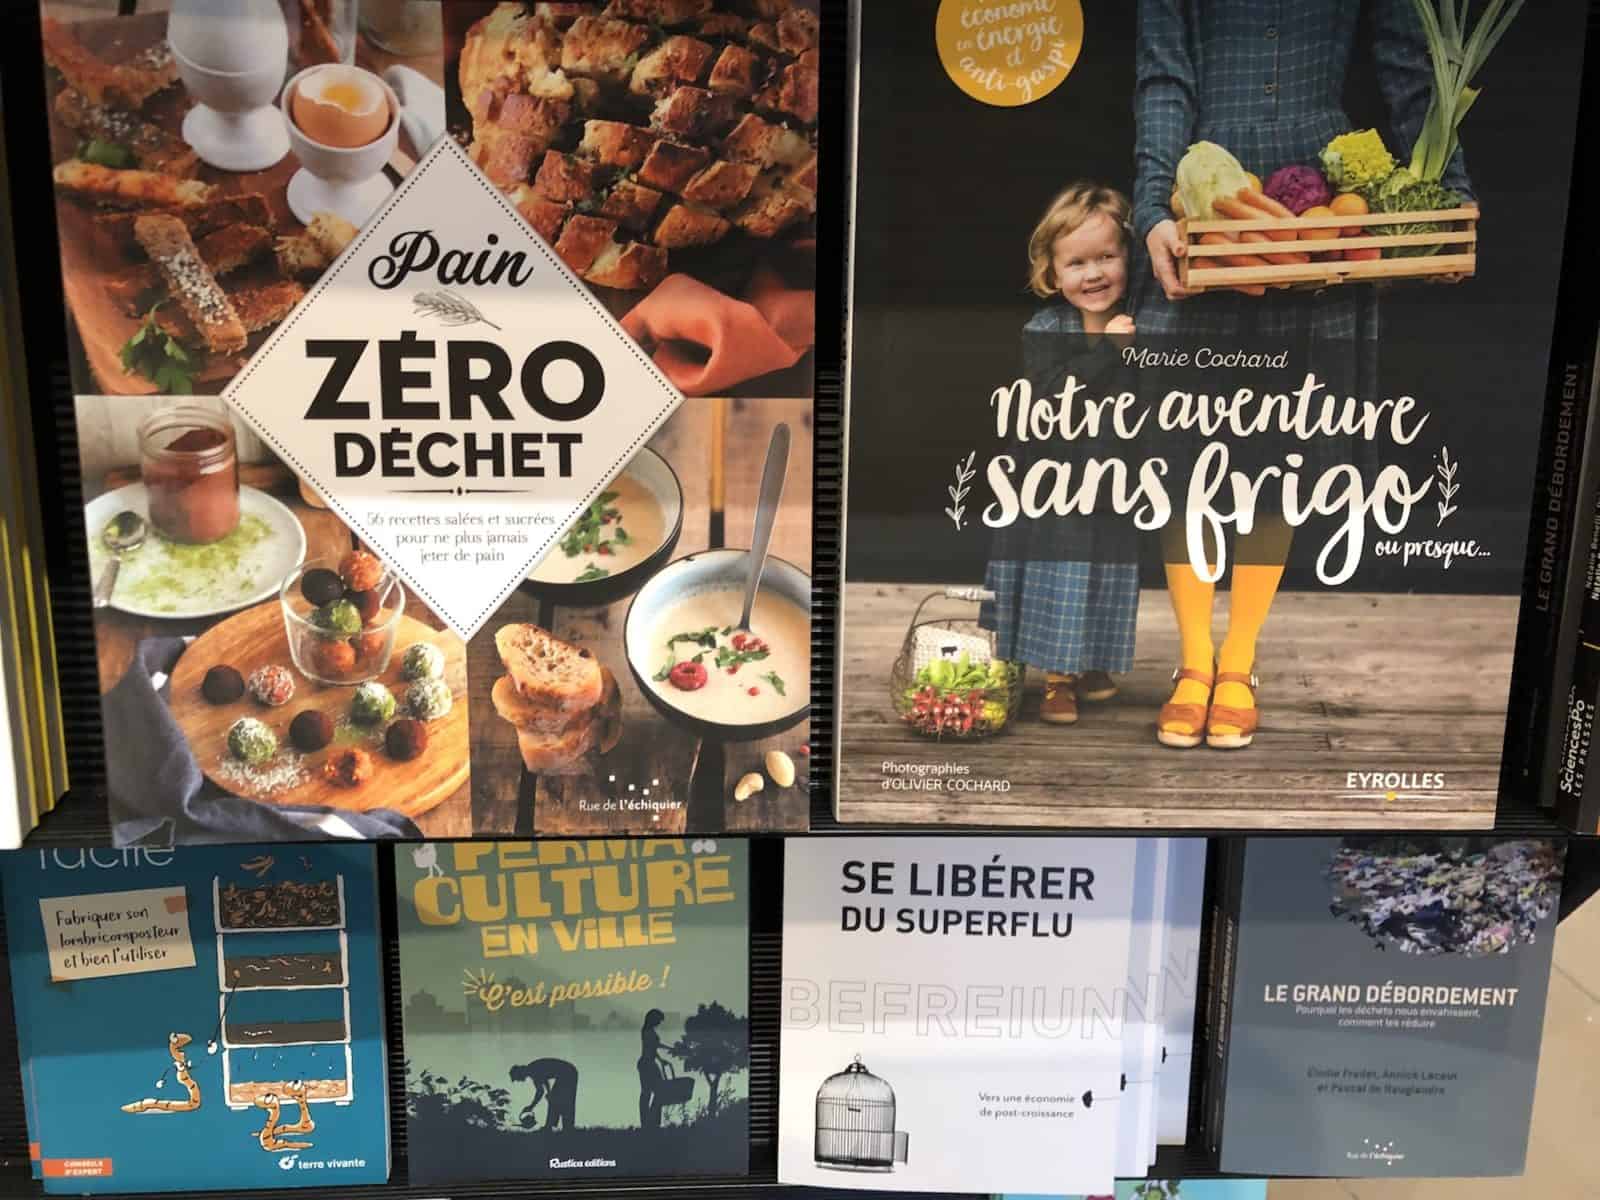 The Maison du Zéro Déchet (house of zero waste) Paris concept store is the place to buy French cooking books to set you on your way to zero-waste living.